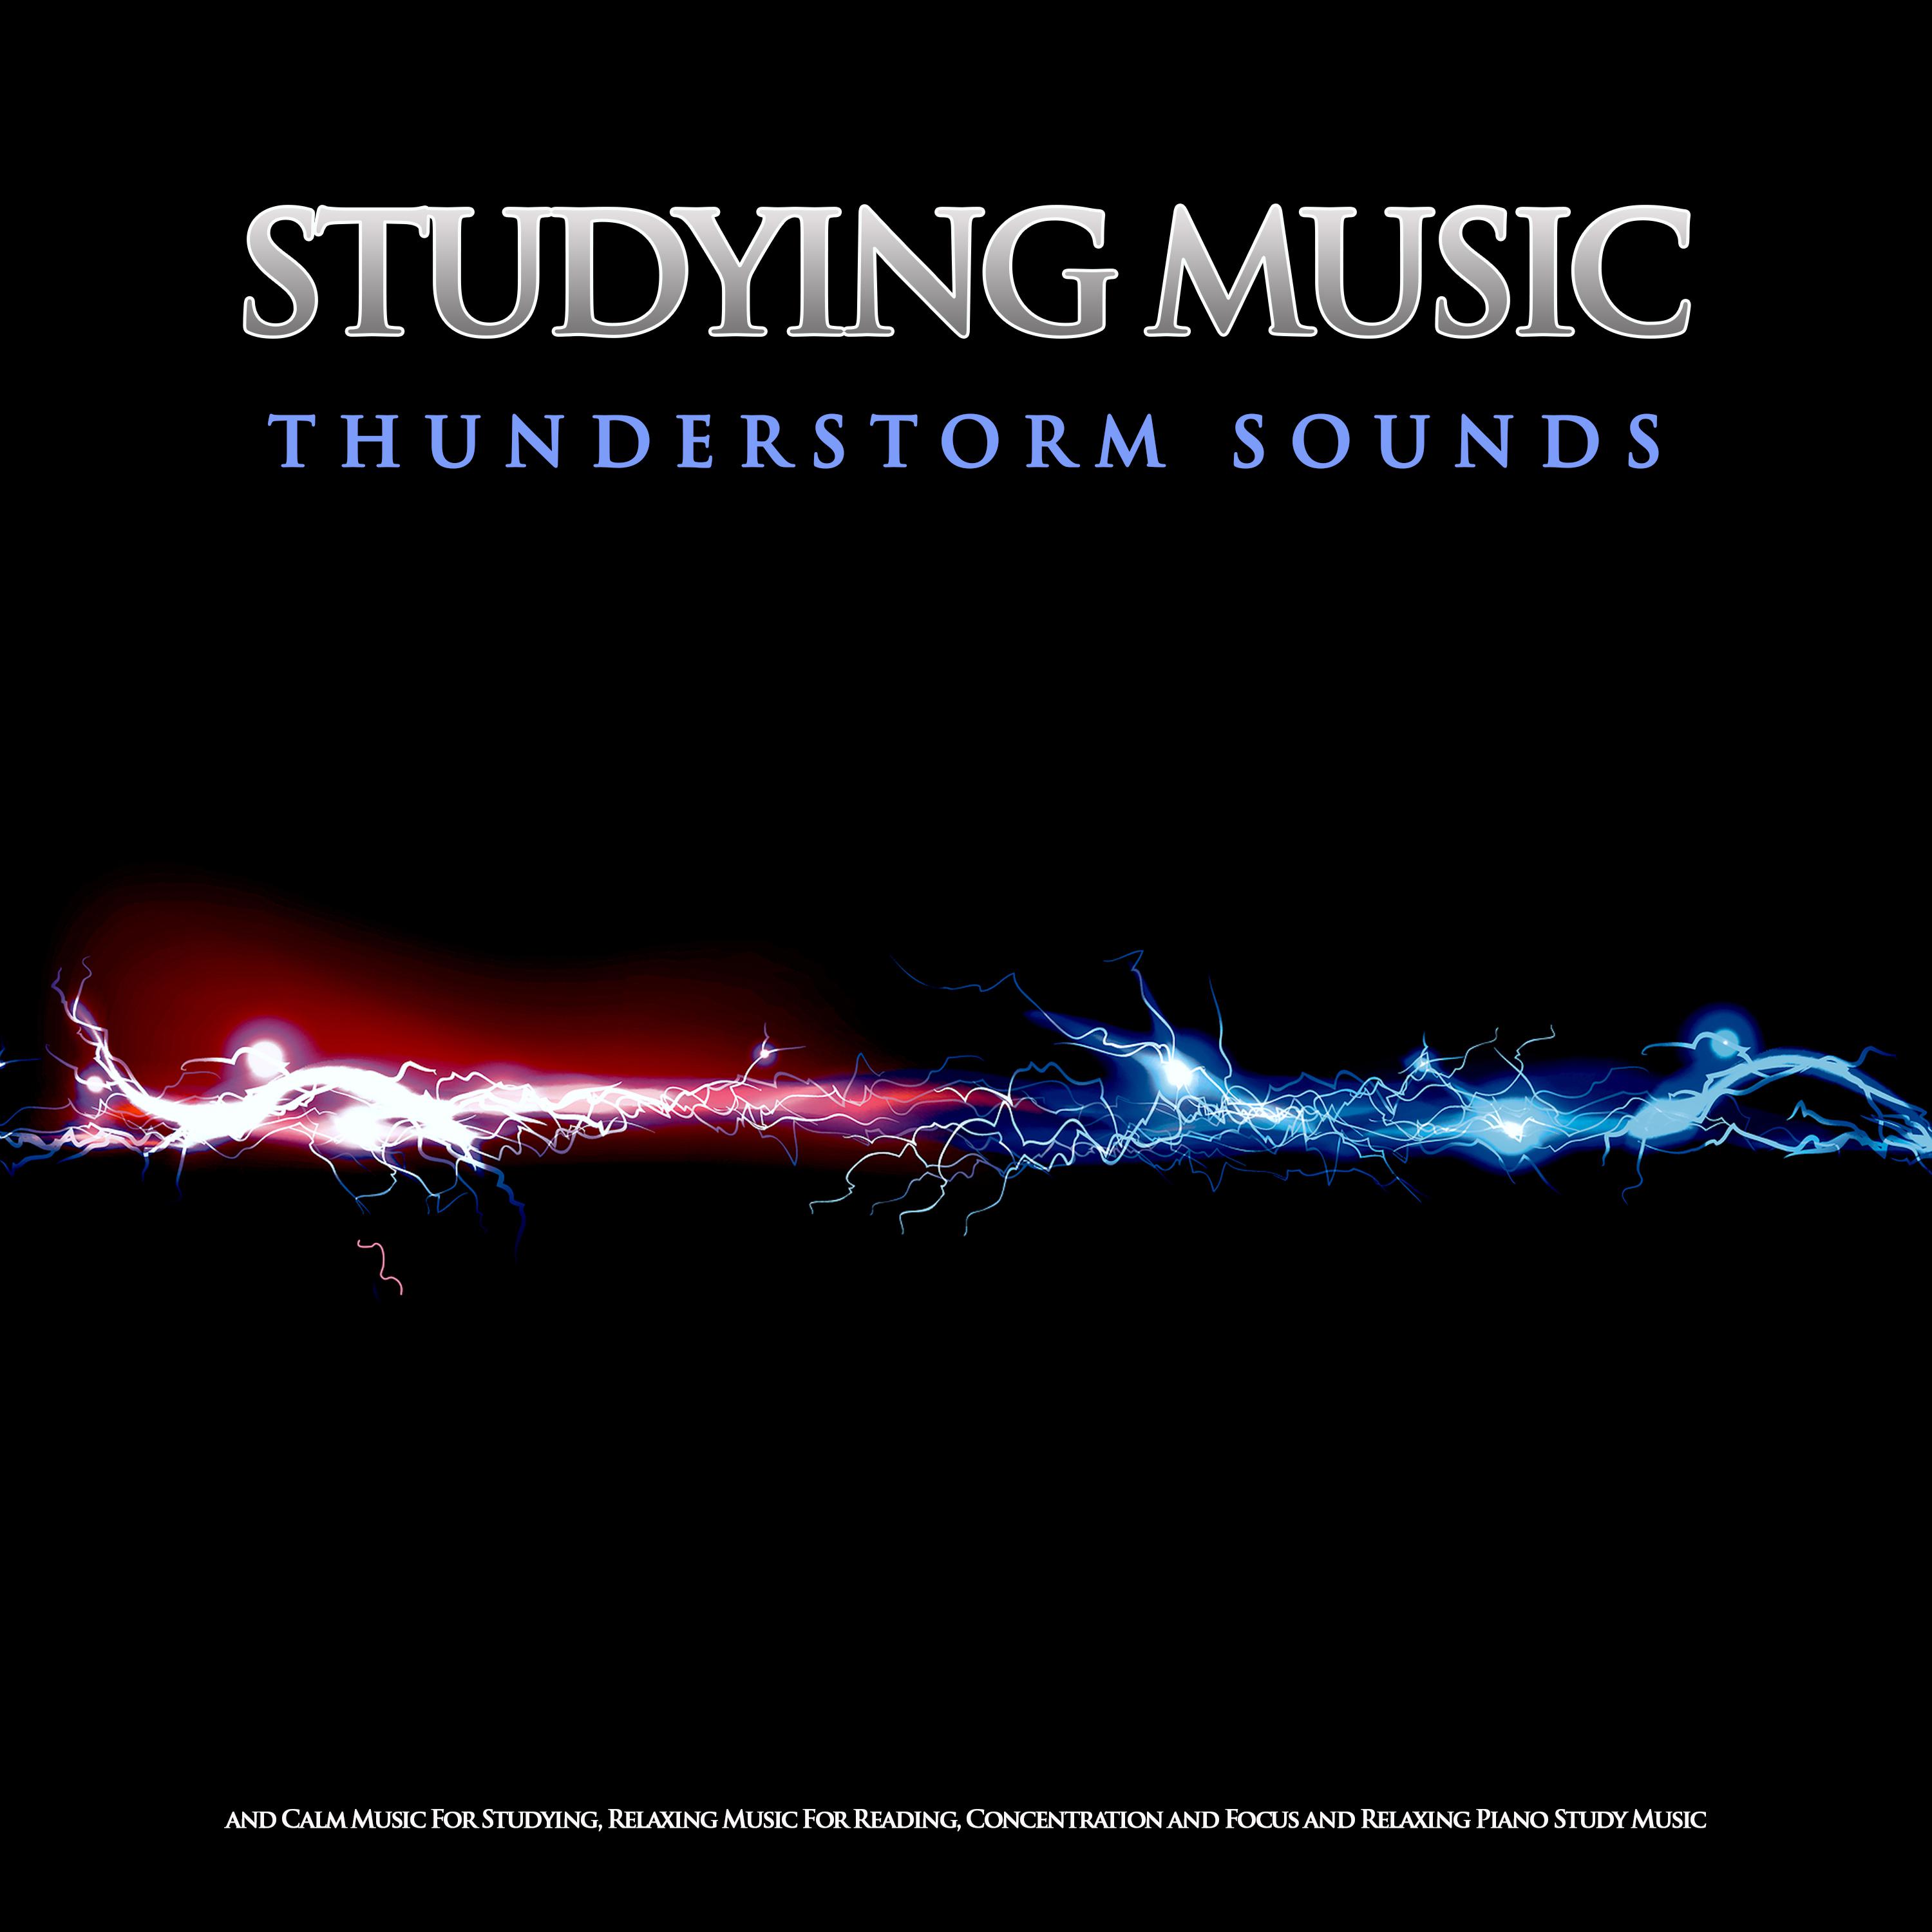 Sounds of a Thunderstorm Reading Music